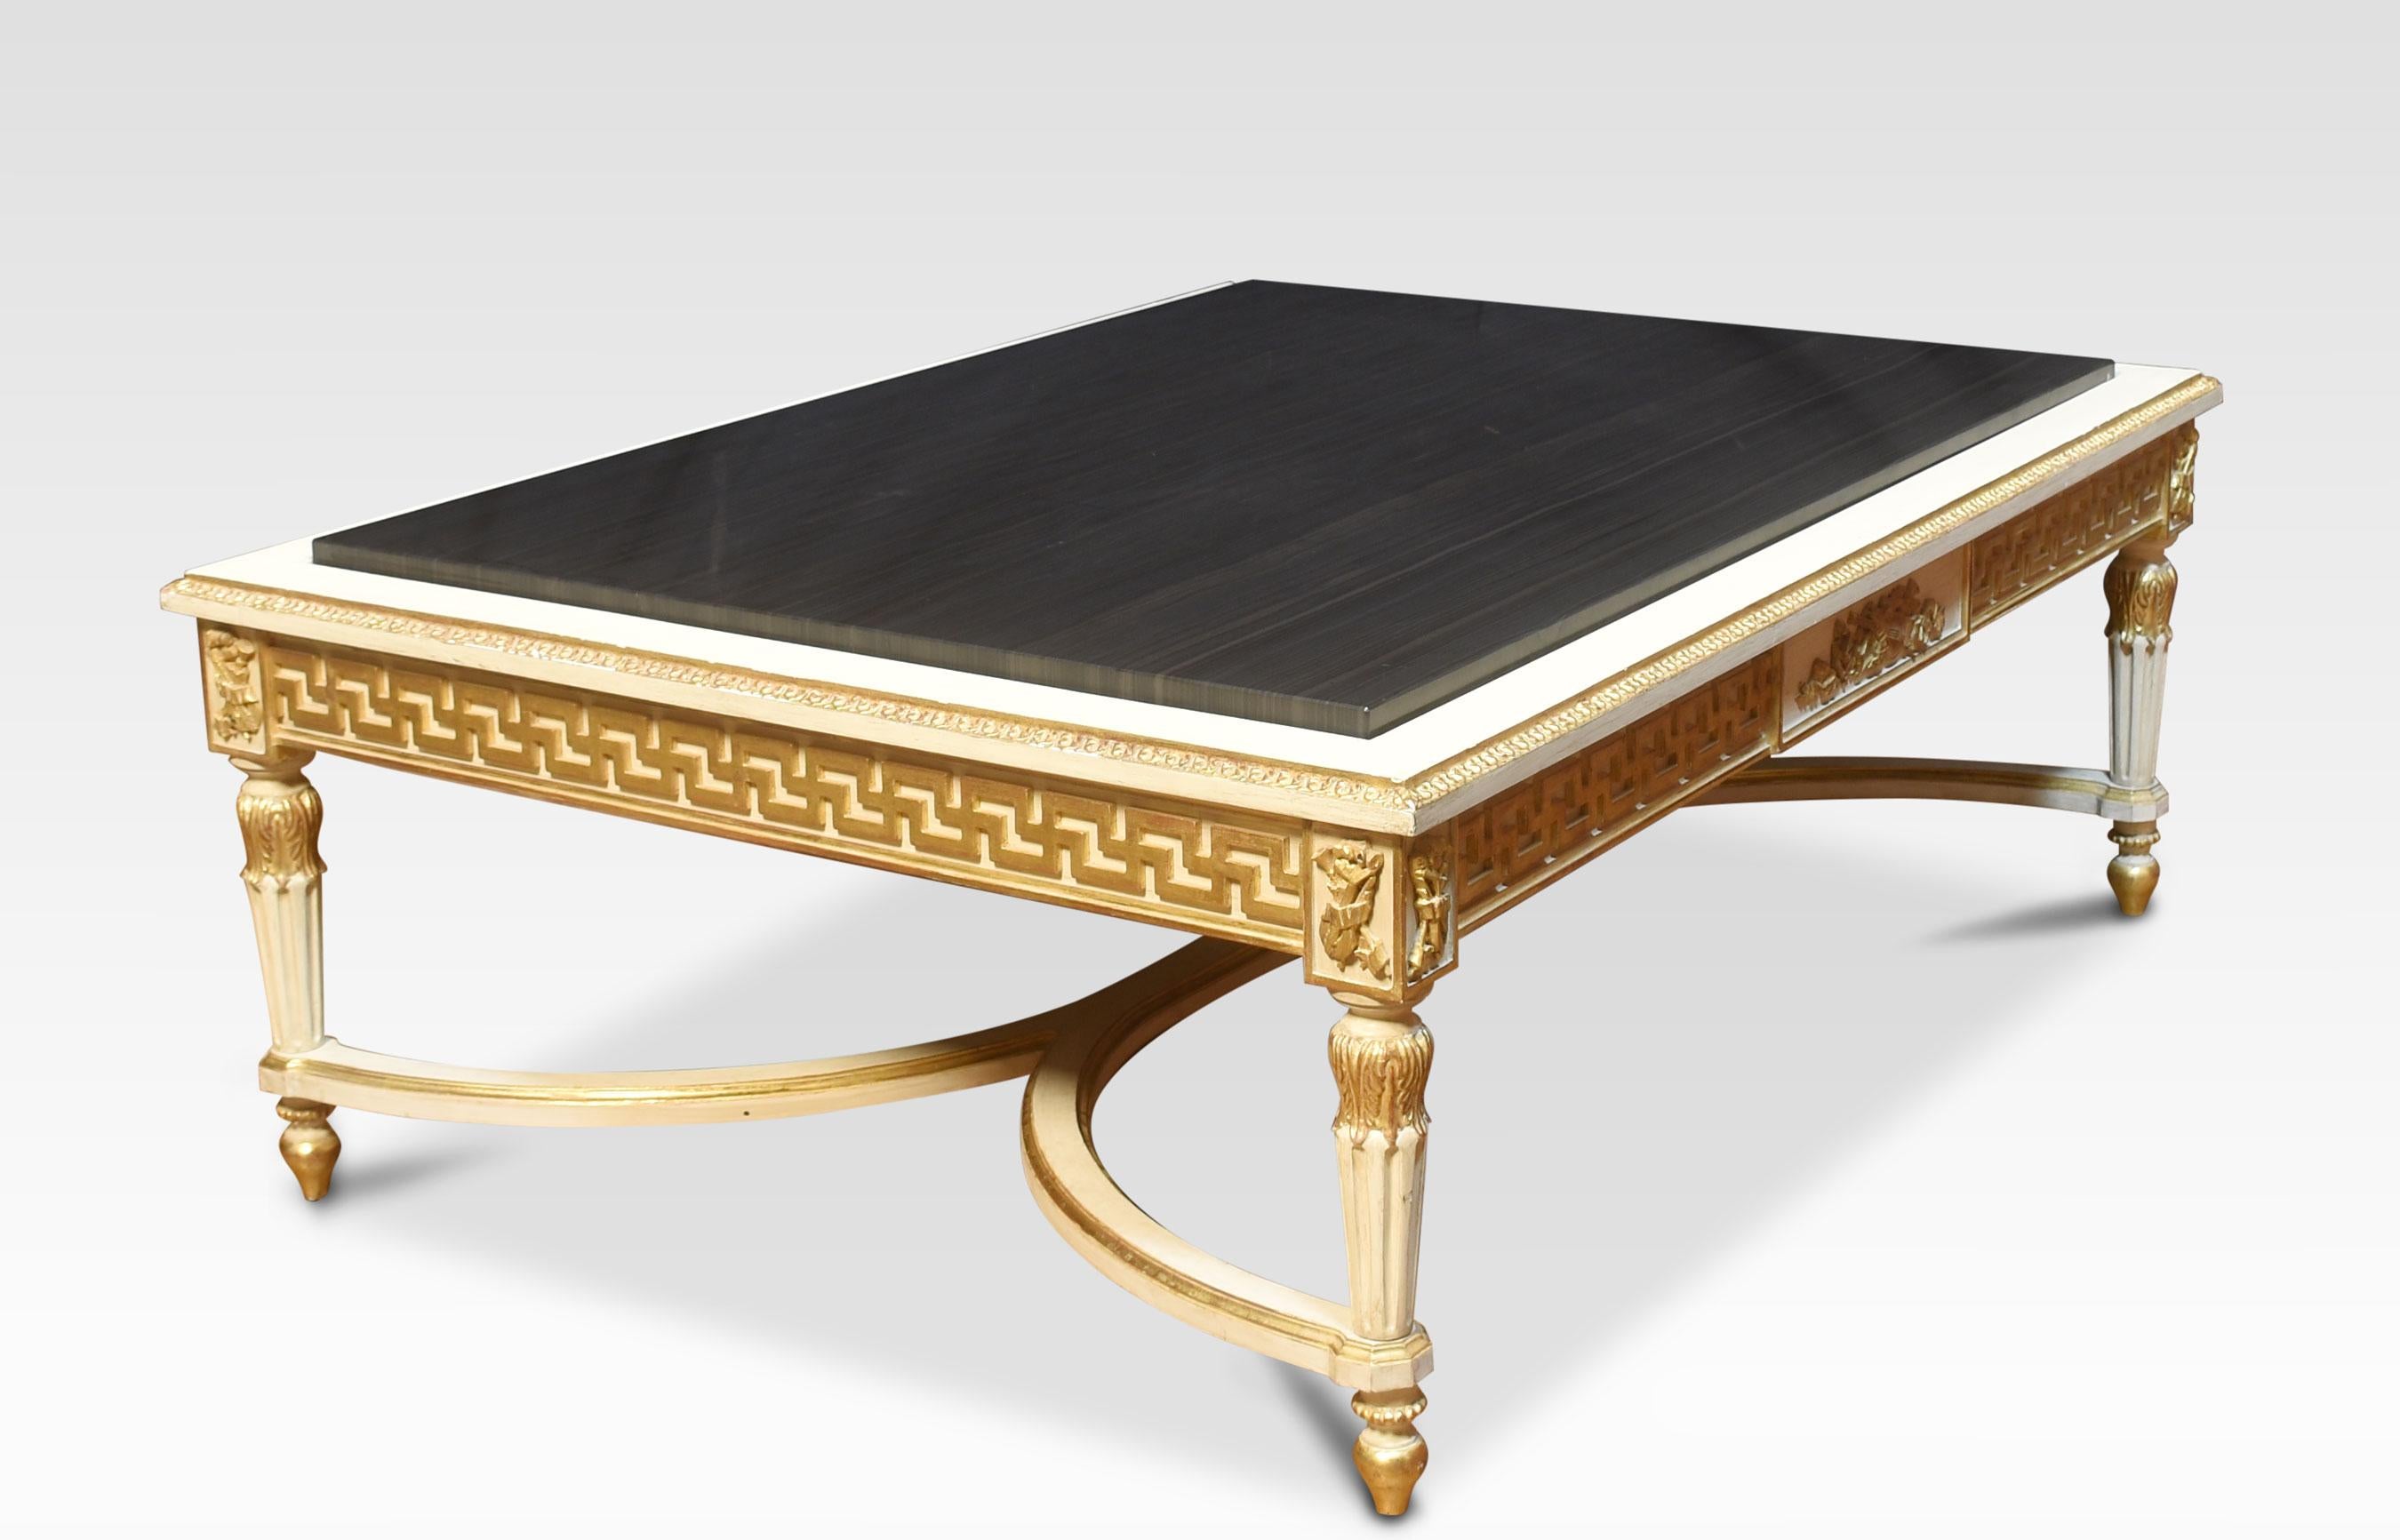 Venetian style coffee table, the large rectangular black veined marble top above cream and gilt painted base. All raised up on turned reeded tapering legs, united by curved stretchers.
Dimensions
Height 19 Inches
Width 53 Inches
Depth 39.5 Inches